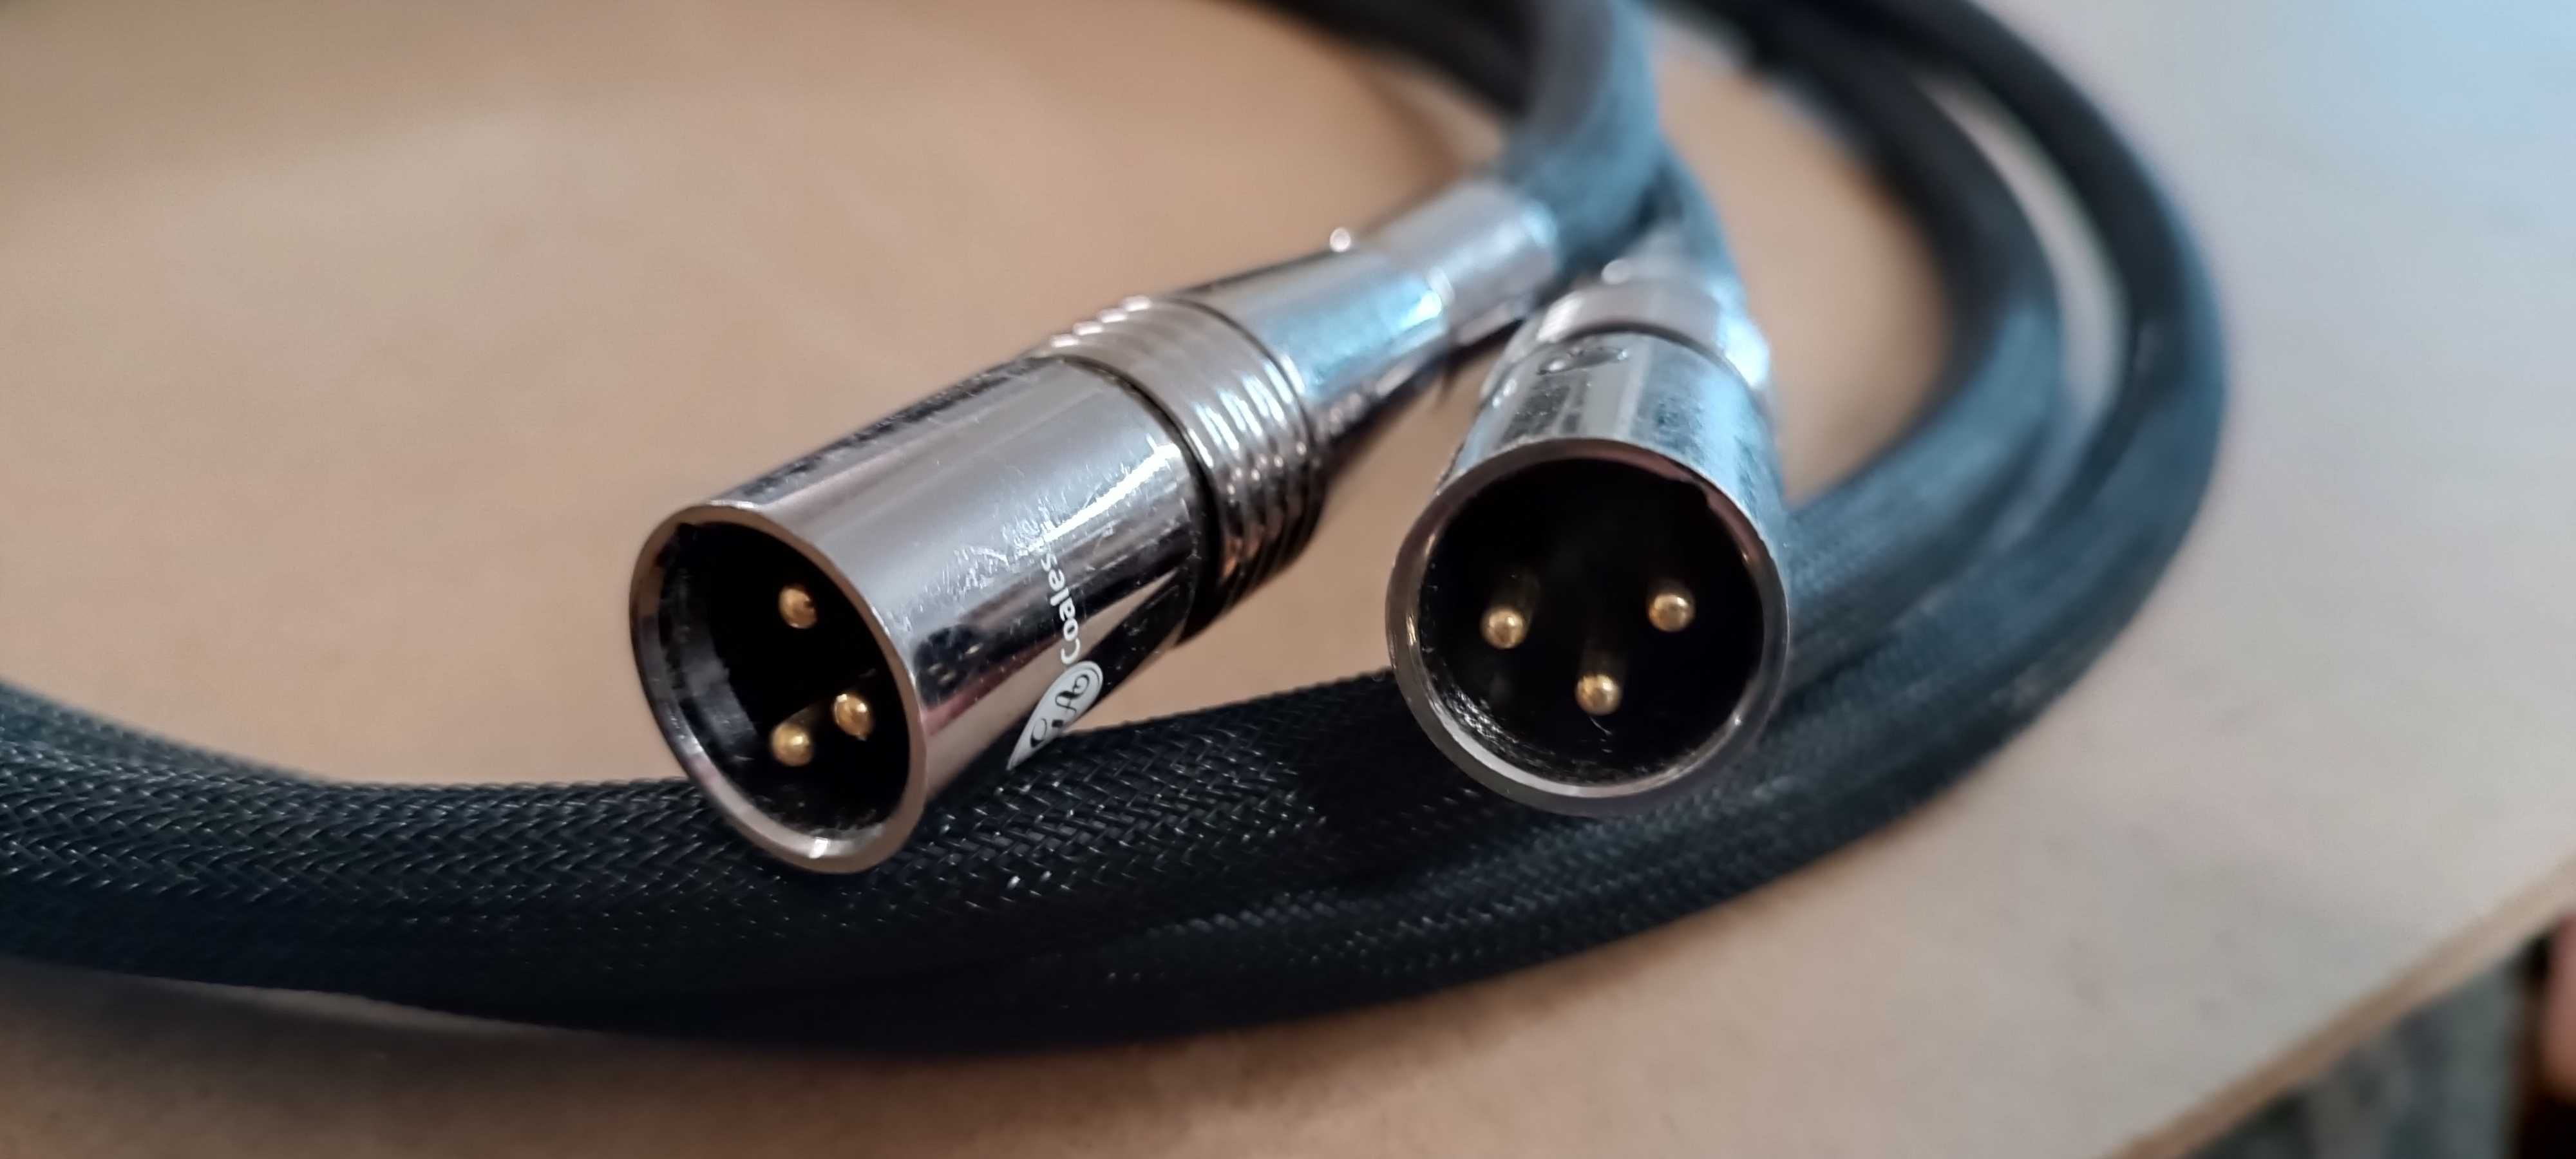 GRAVES AUDIO Oxygen Free XLR Interconnects in NEW condition.